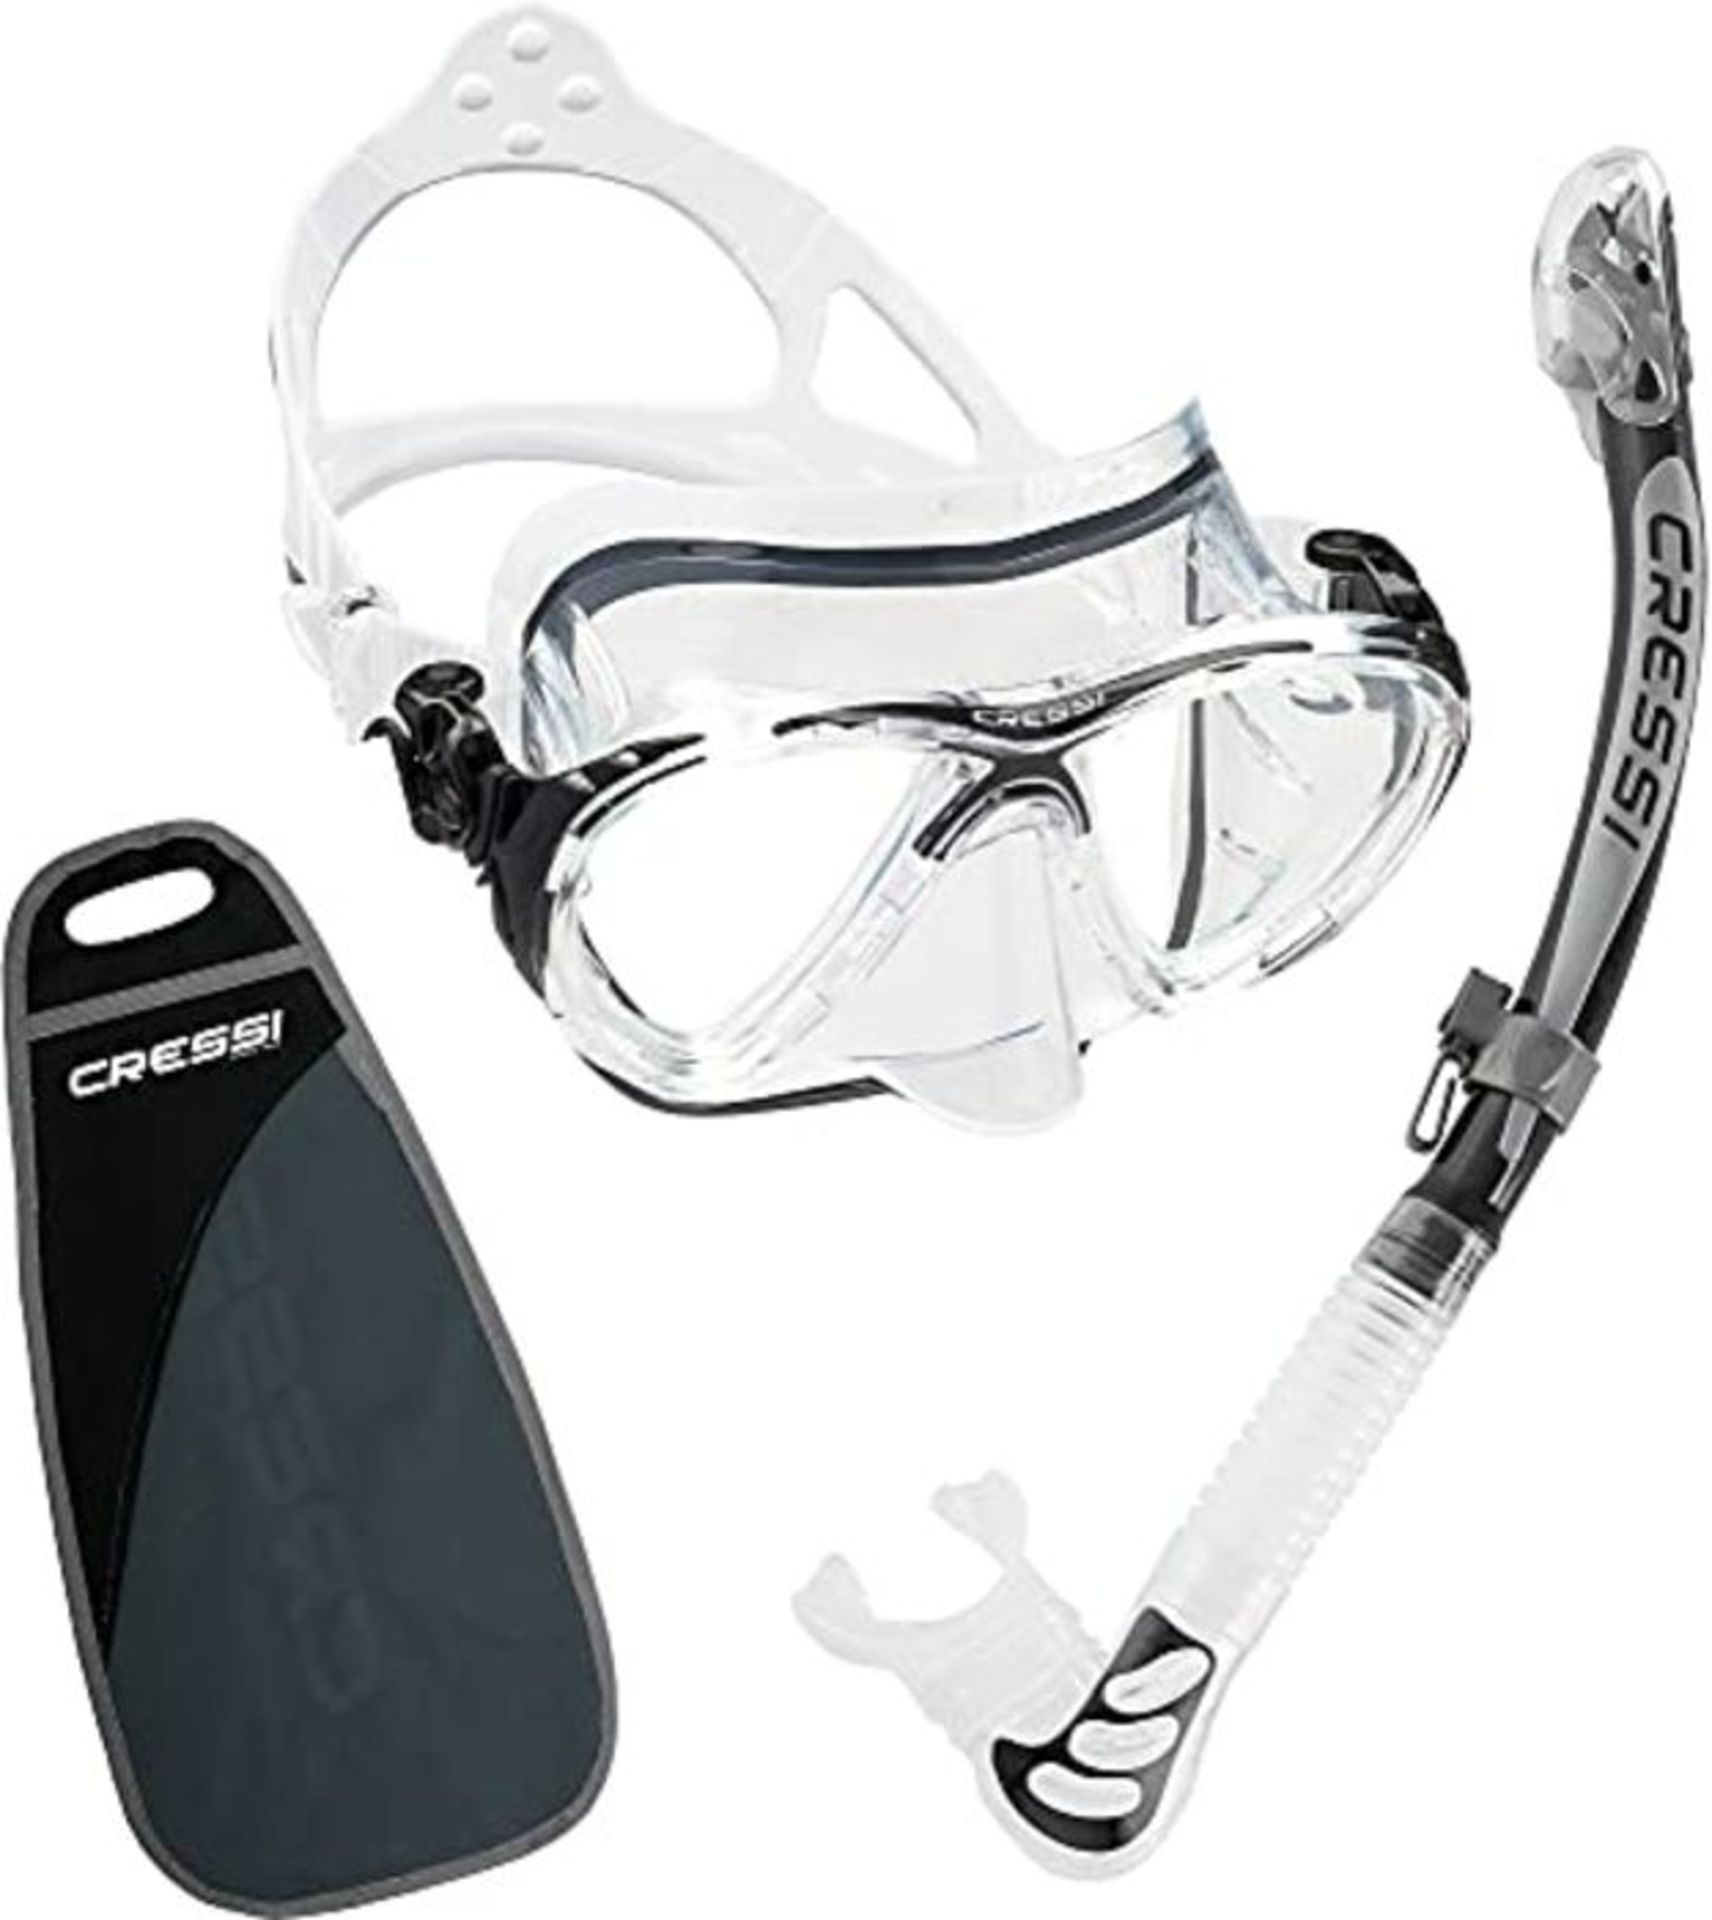 Cressi Big Eyes Evolution Plus Kappa Ultra Dry Combo Diving Set (Made in Italy), Clear